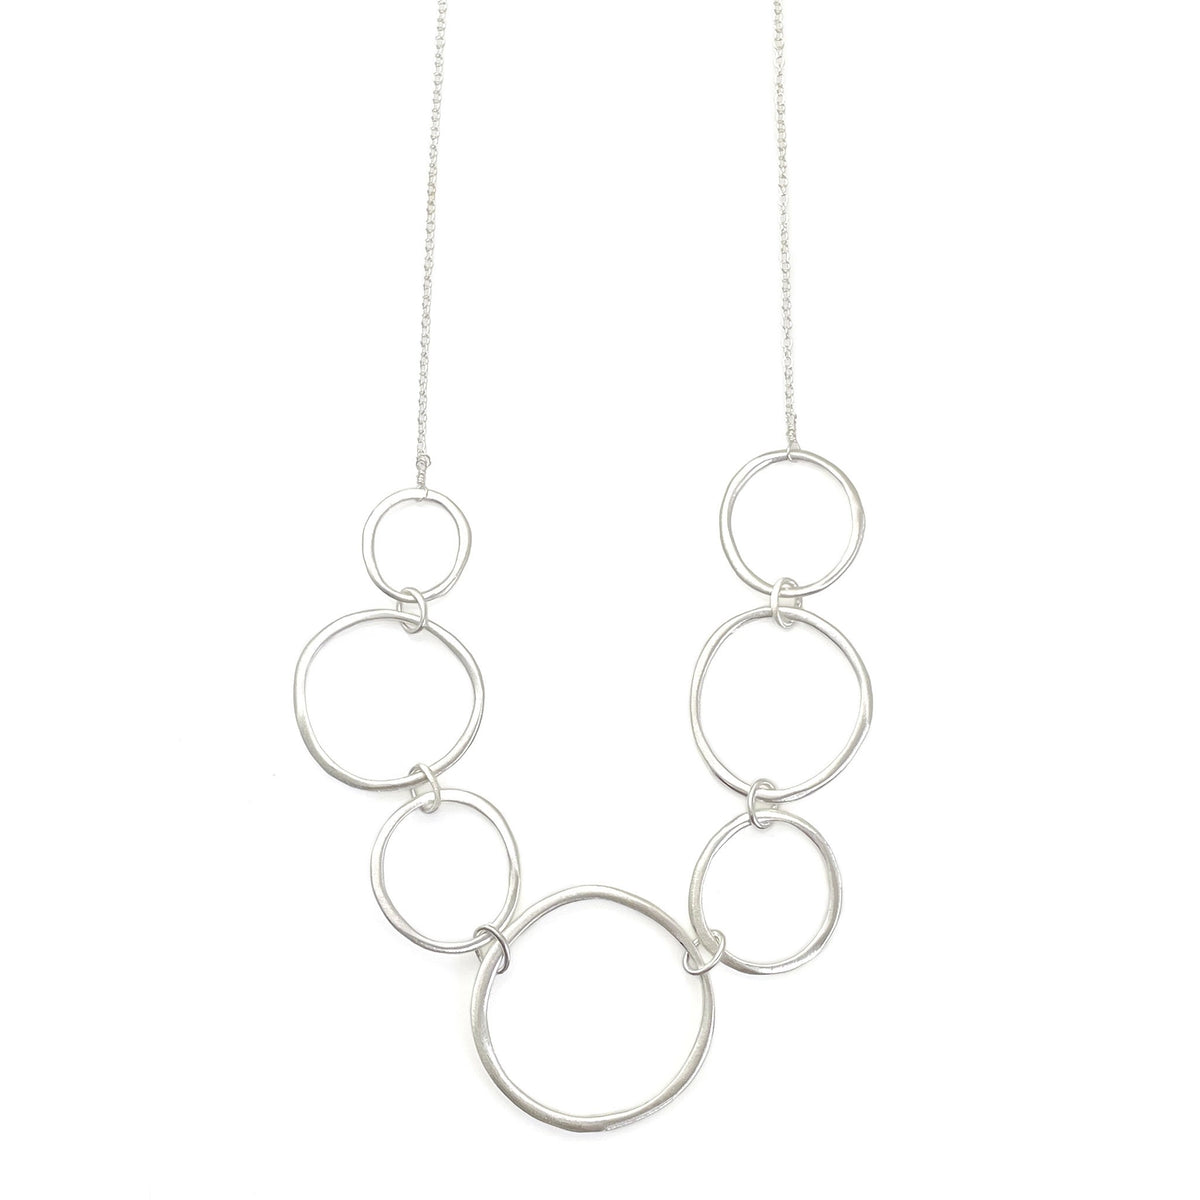 Seven Links Necklace | Silver